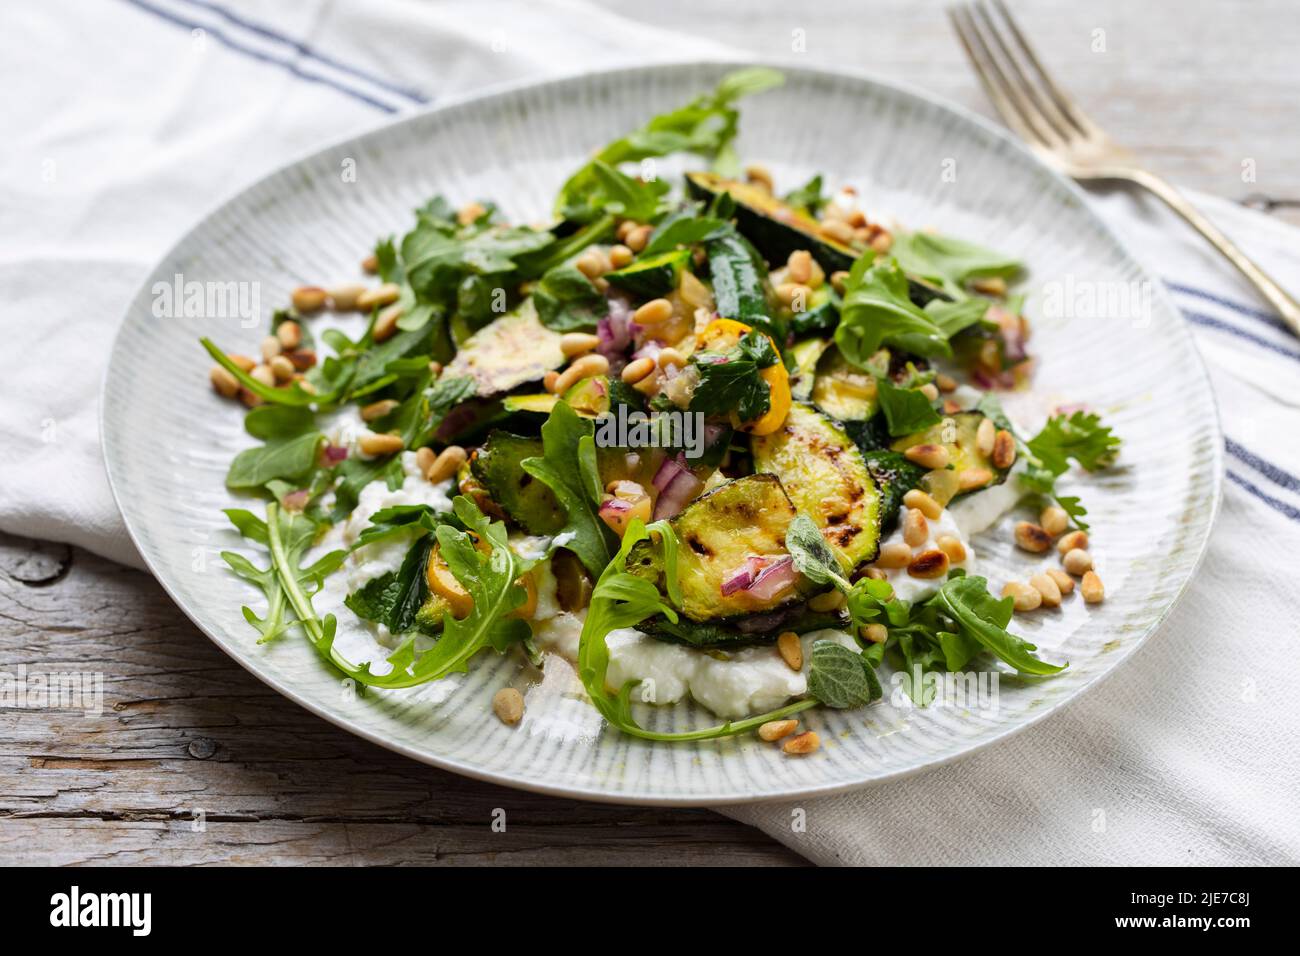 Baby courgette salad on ricotta cheese Stock Photo